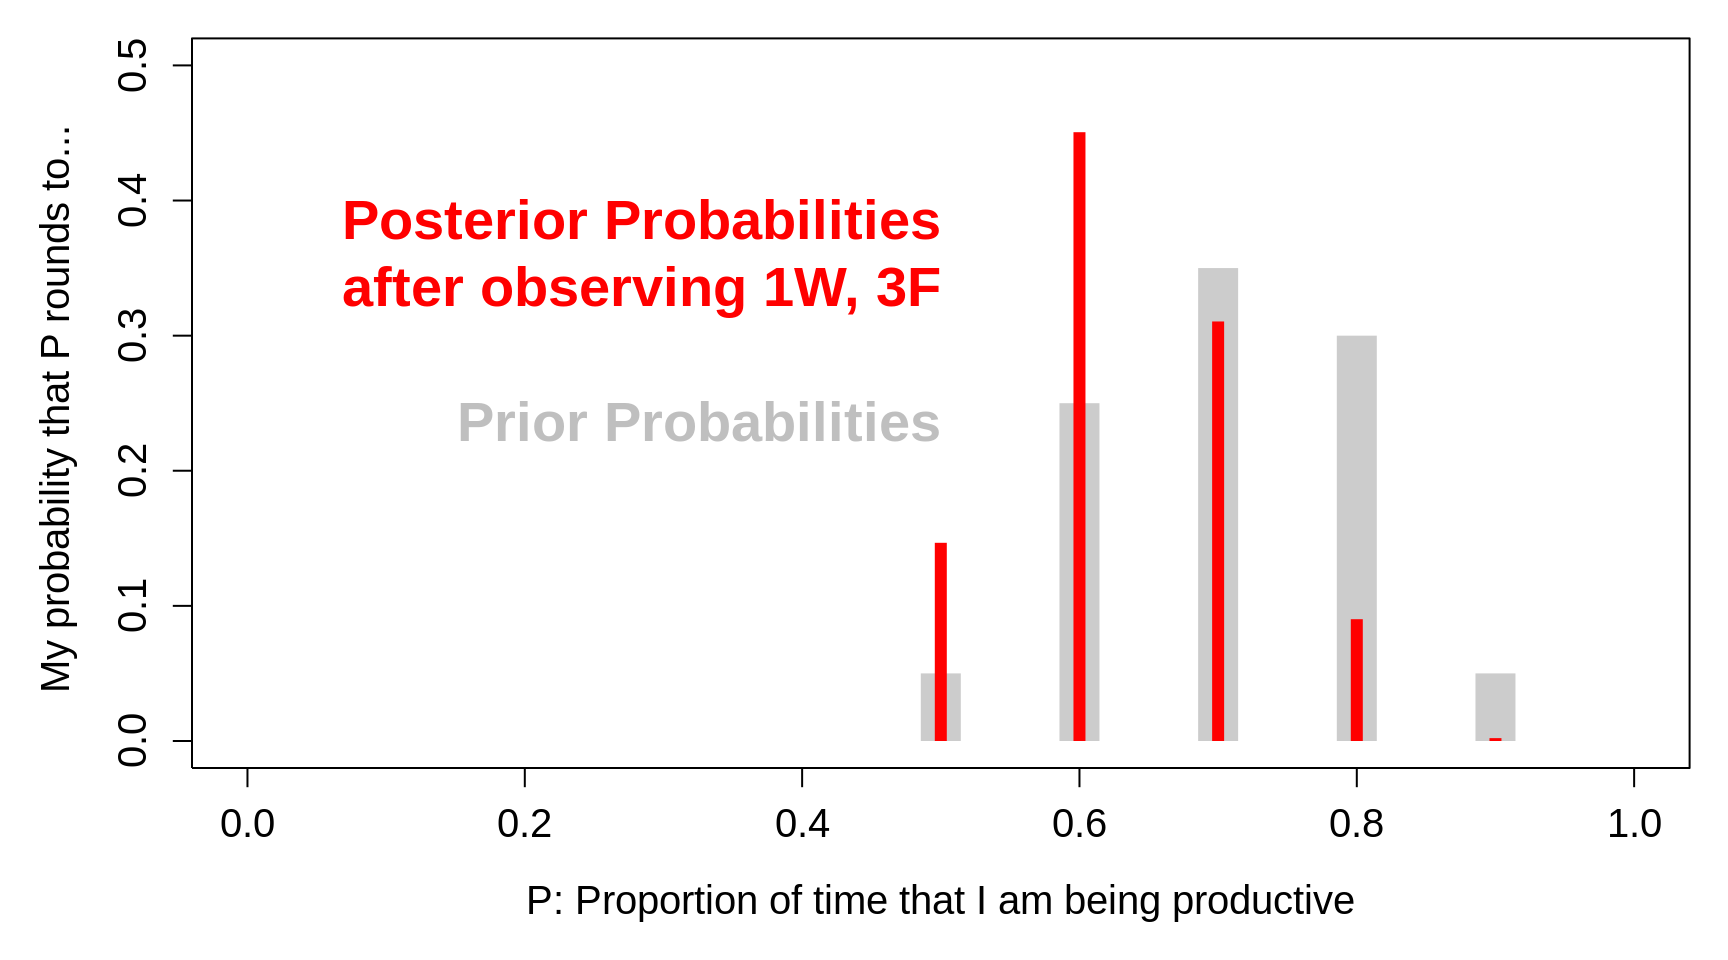 Prior Probabilities for the parameter P, the proportion of time that I am being productive, together with the corresponding posterior probabilities, after observing that in n = 4 randomly sampled occasions, I was actually productive in only 1 of the 4.